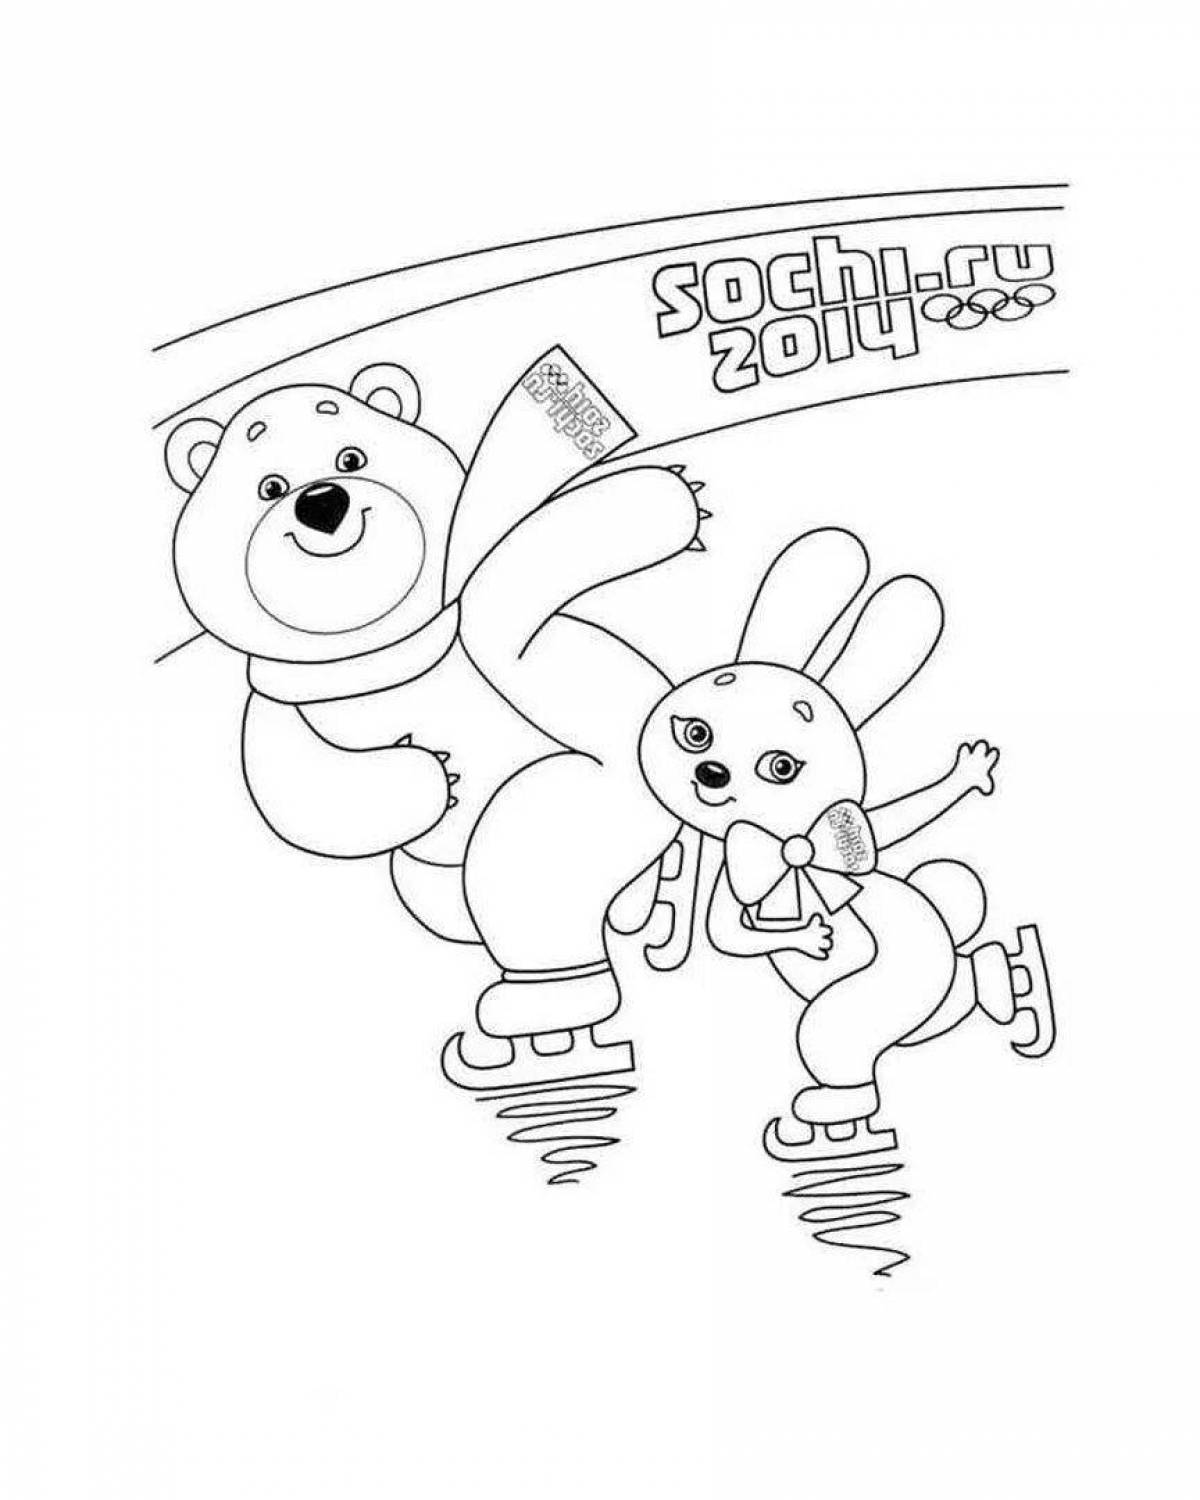 Amazing olympic coloring pages for kids